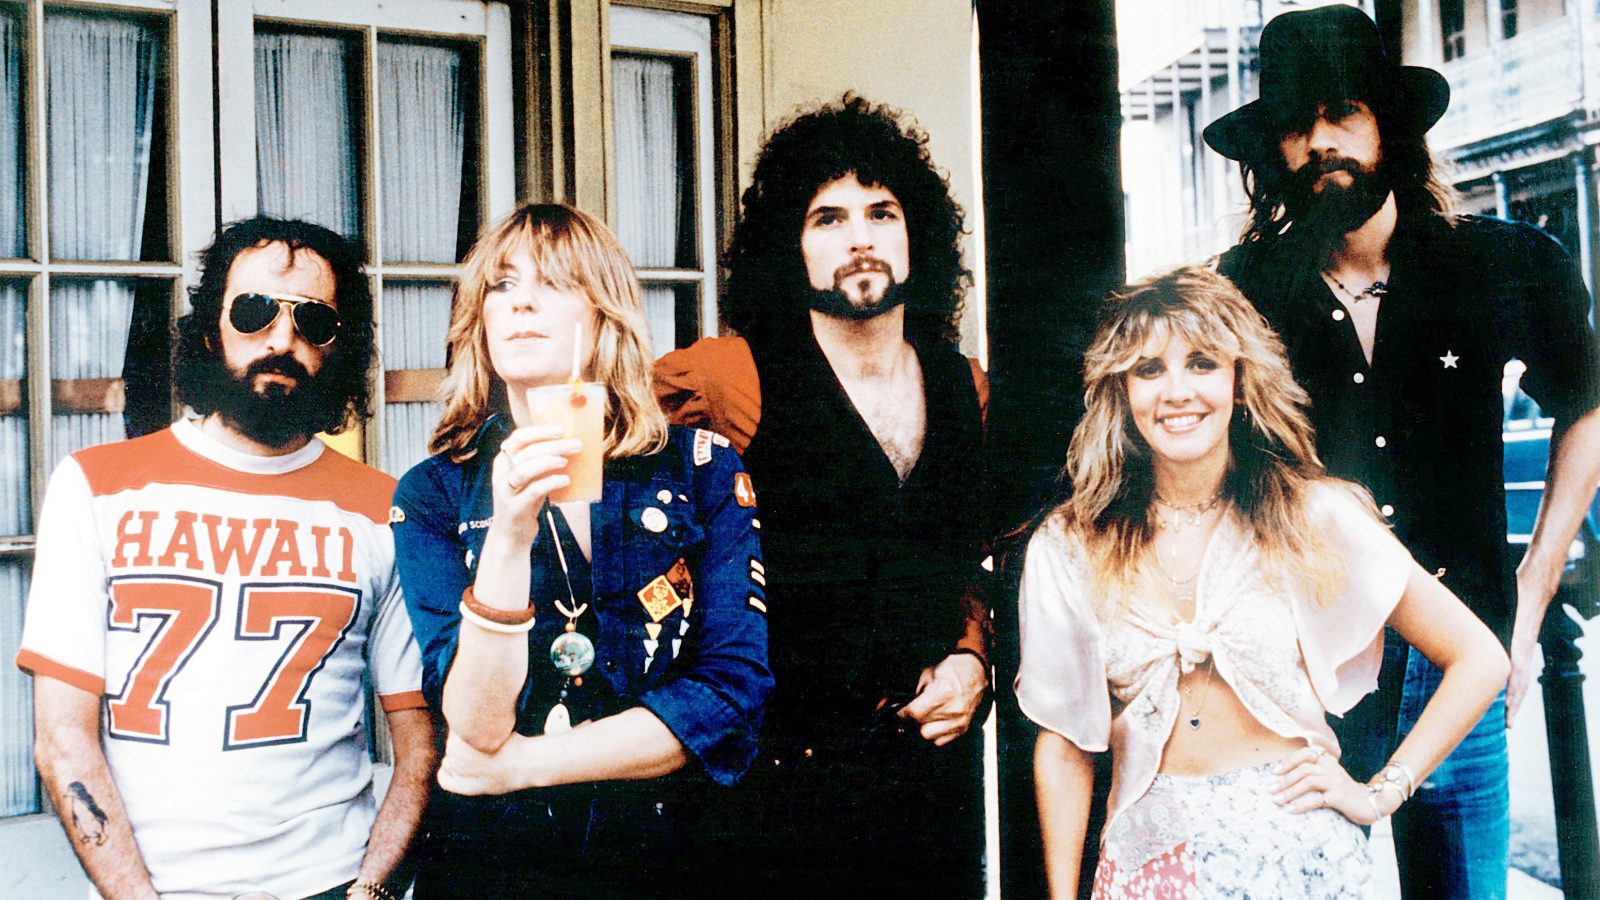 If You Find This General Knowledge Quiz Easy, You’re Just Very Smart Fleetwood Mac Best Tracks Song Listen List Rolling Stone D61f32dd 7022 40e7 A9c9 5a77fc4eb39f